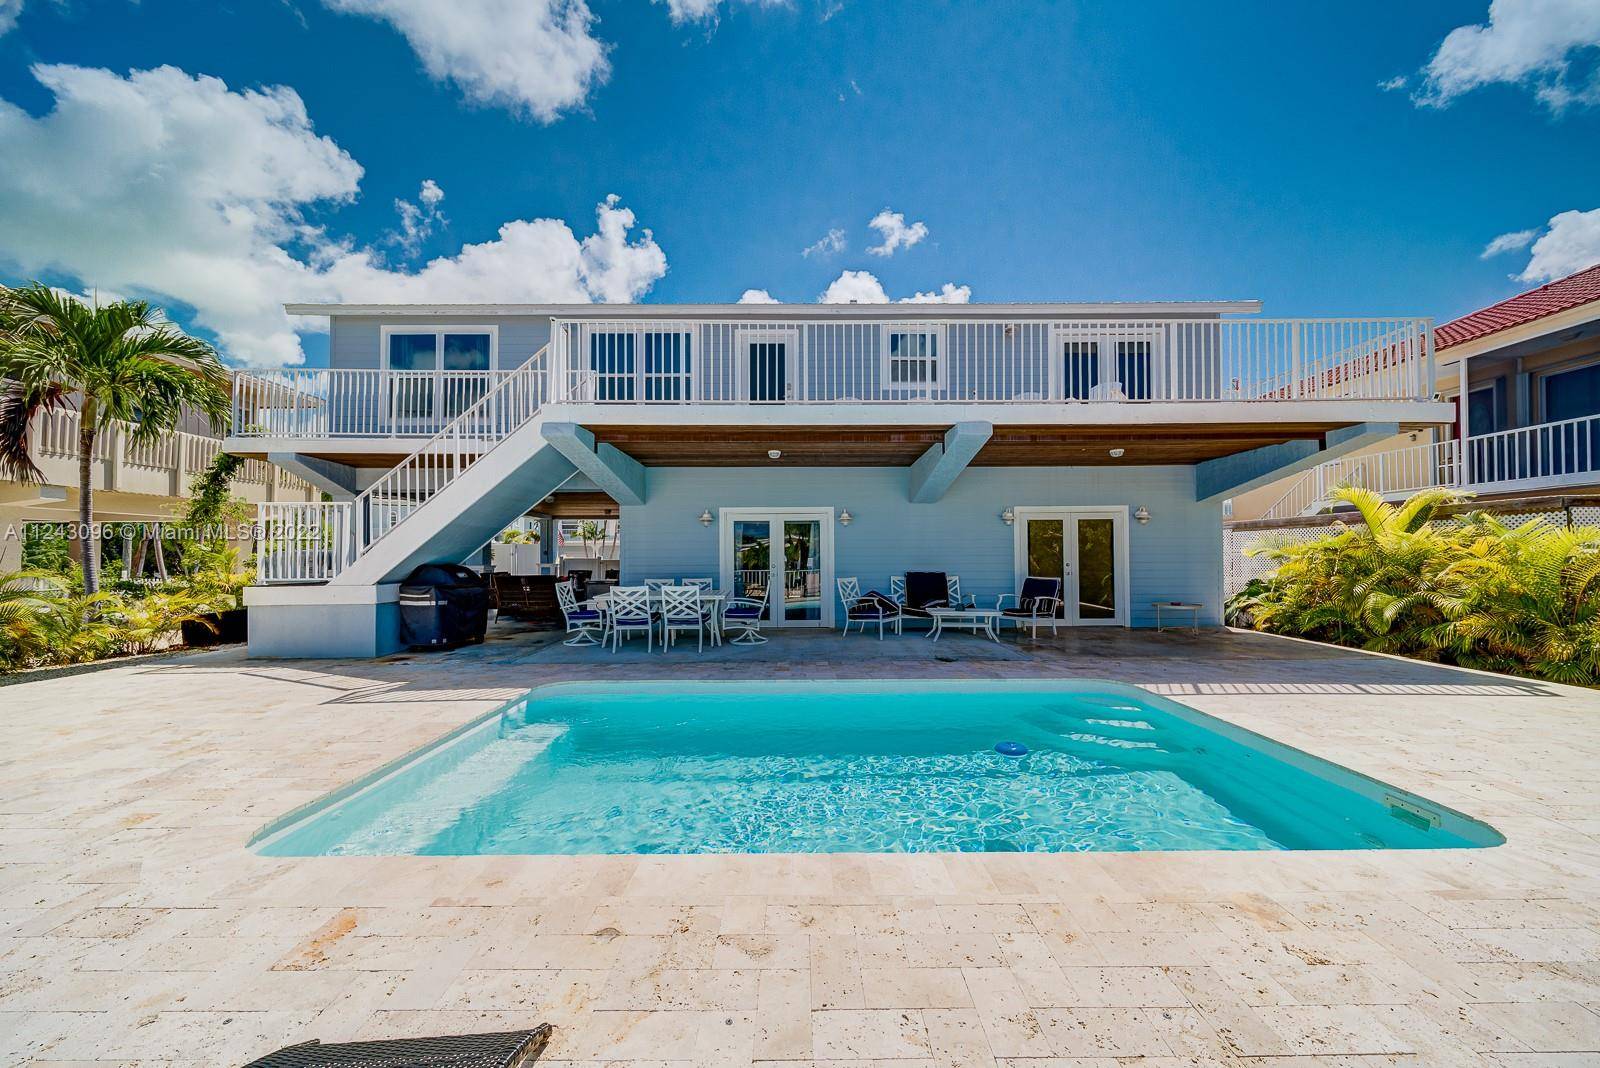 Fully renovated 5 bedroom 3 bathroom vacation style home for rent in Islamorada on a canal.